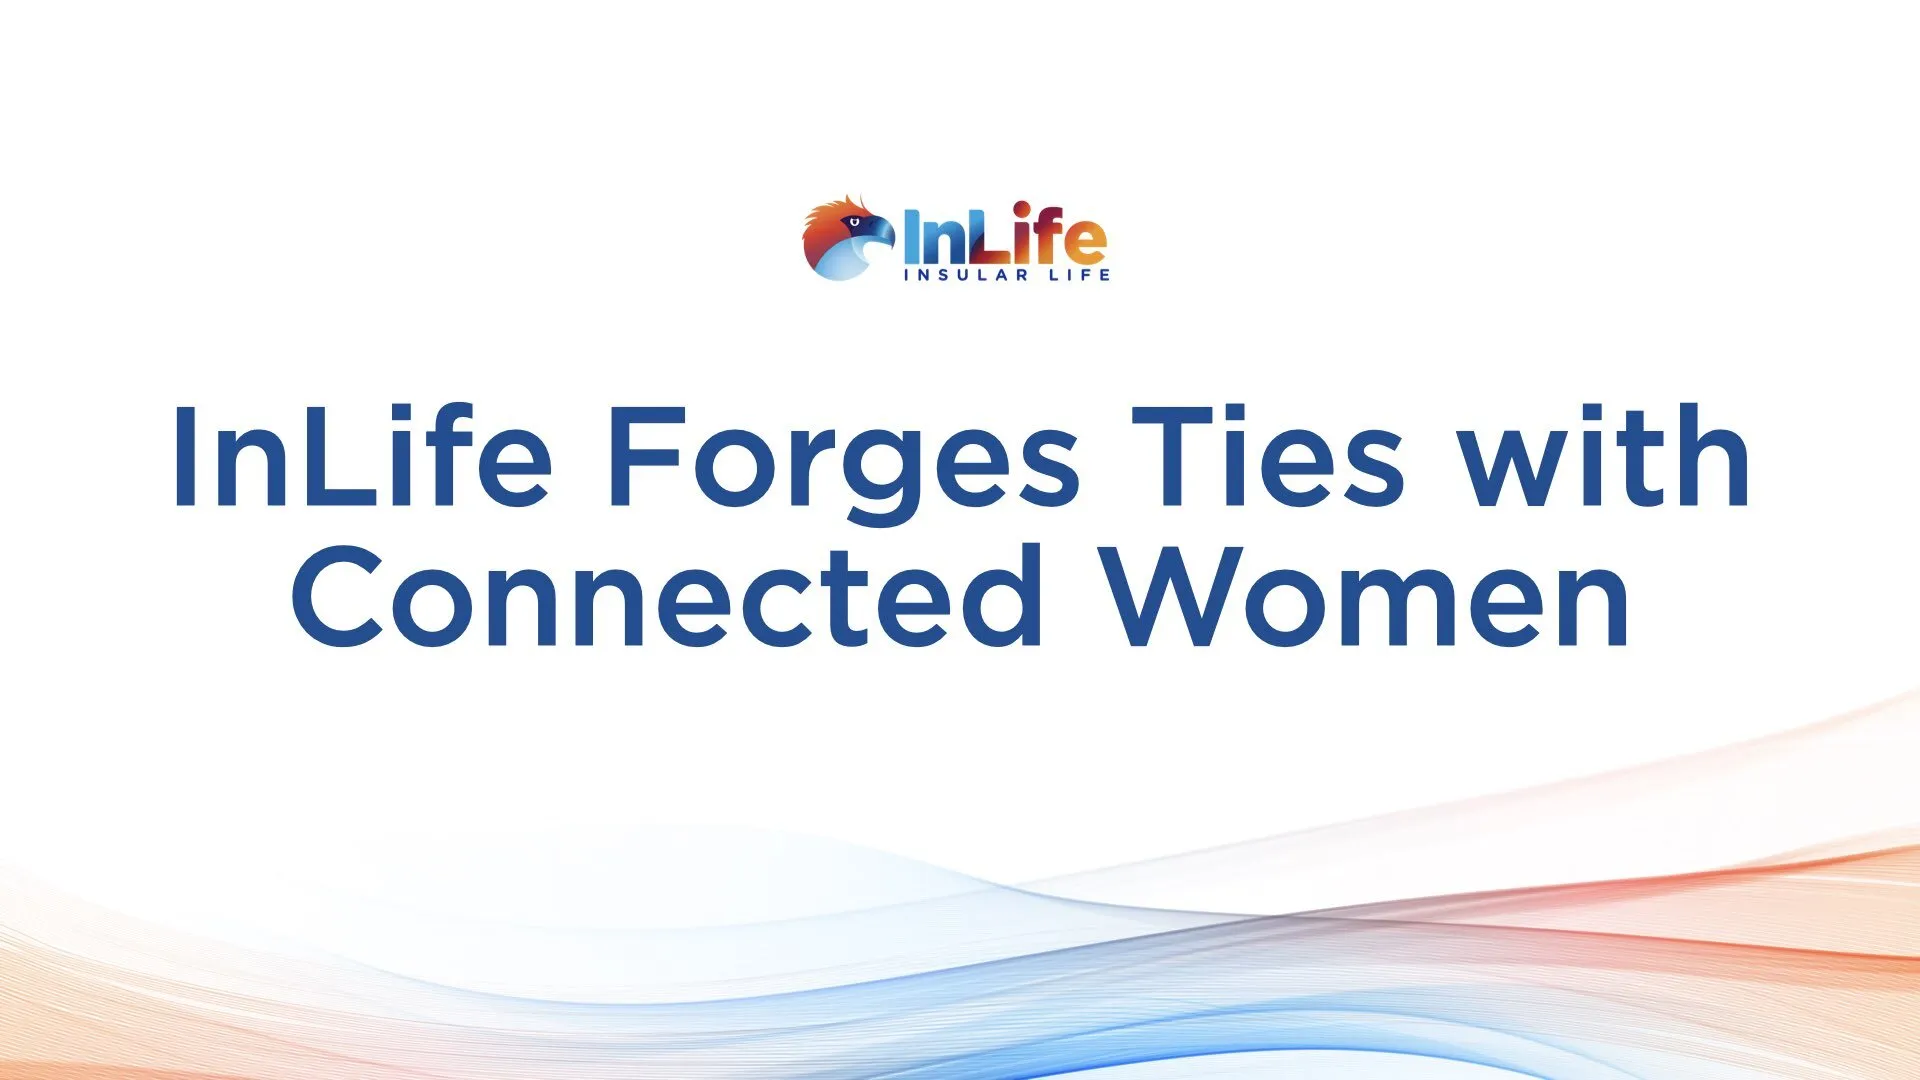 inlife-and-connected-women-forge-ties-for-better-income-opportunities-for-women